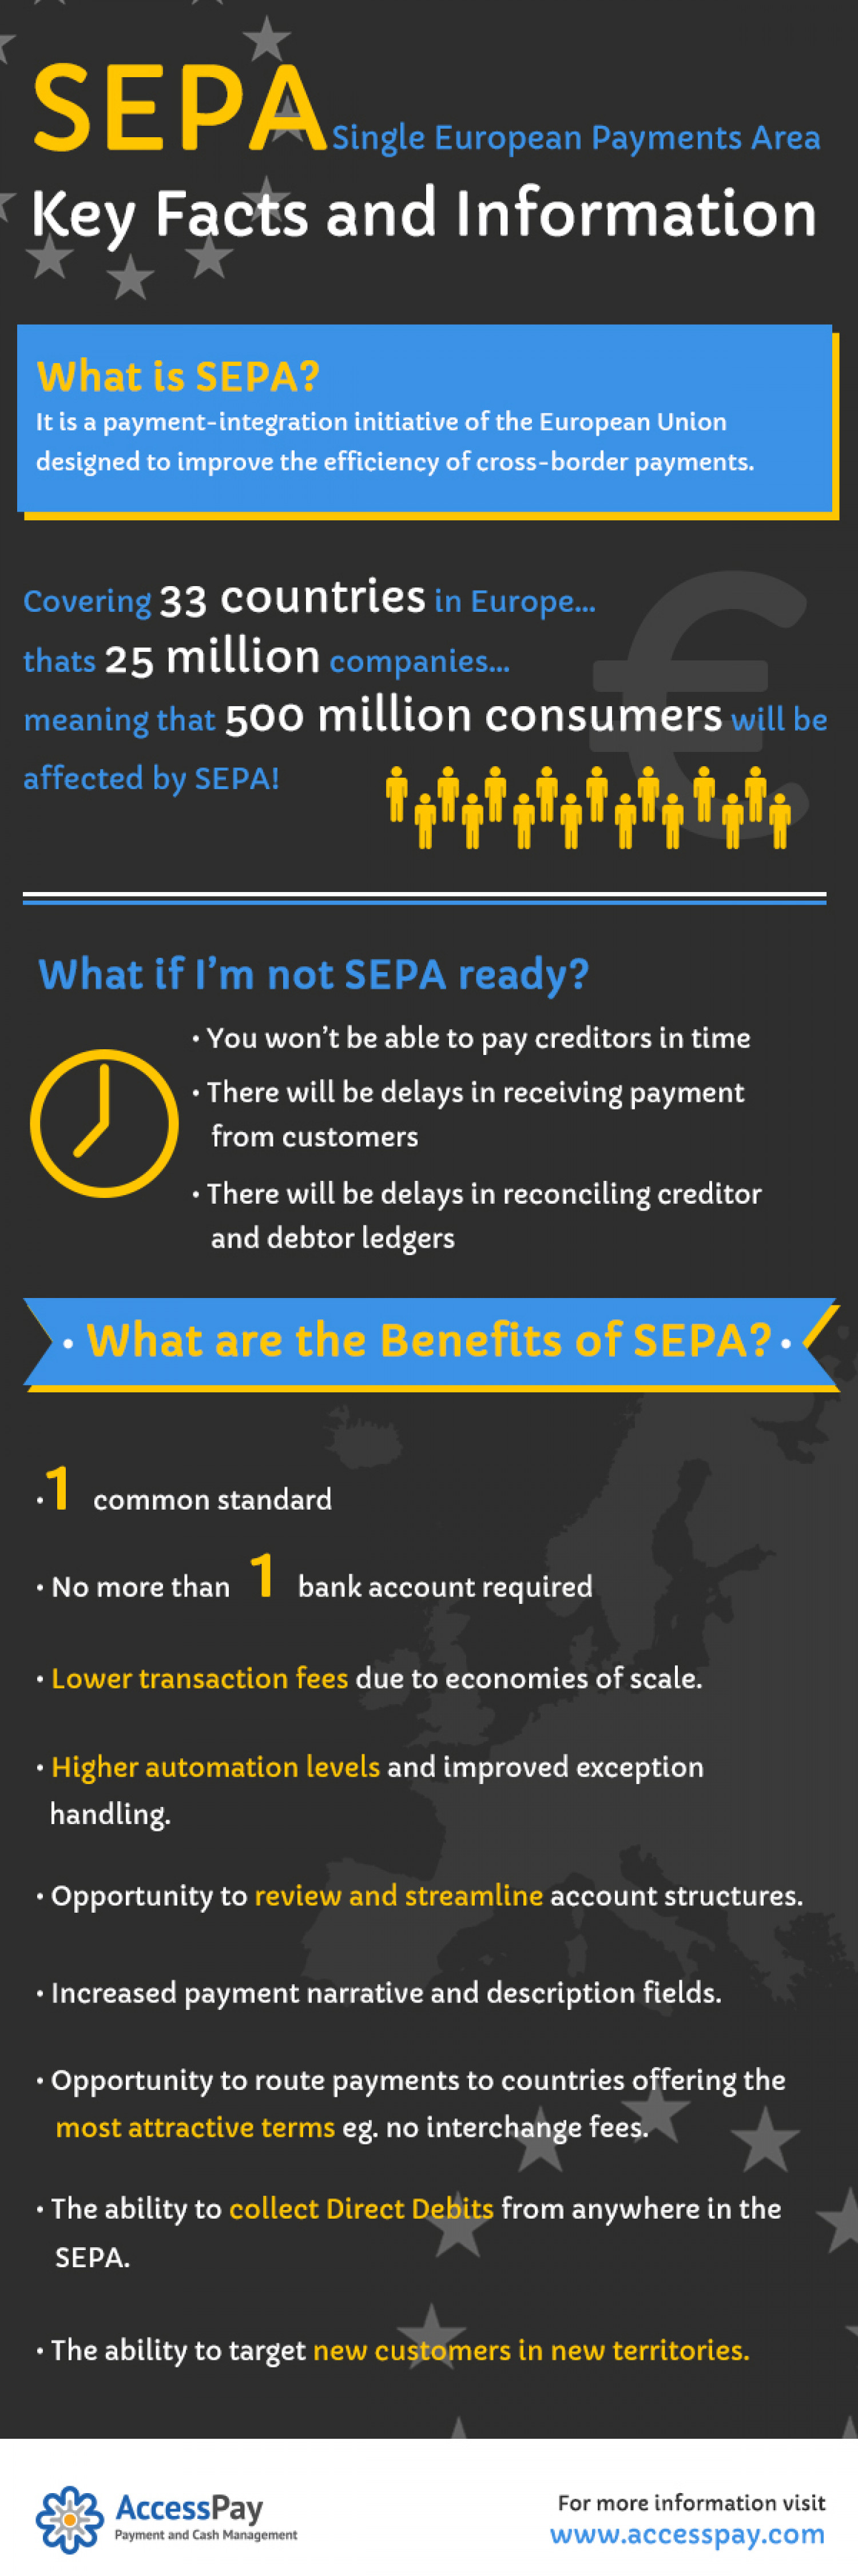 SEPA - key facts and information Infographic